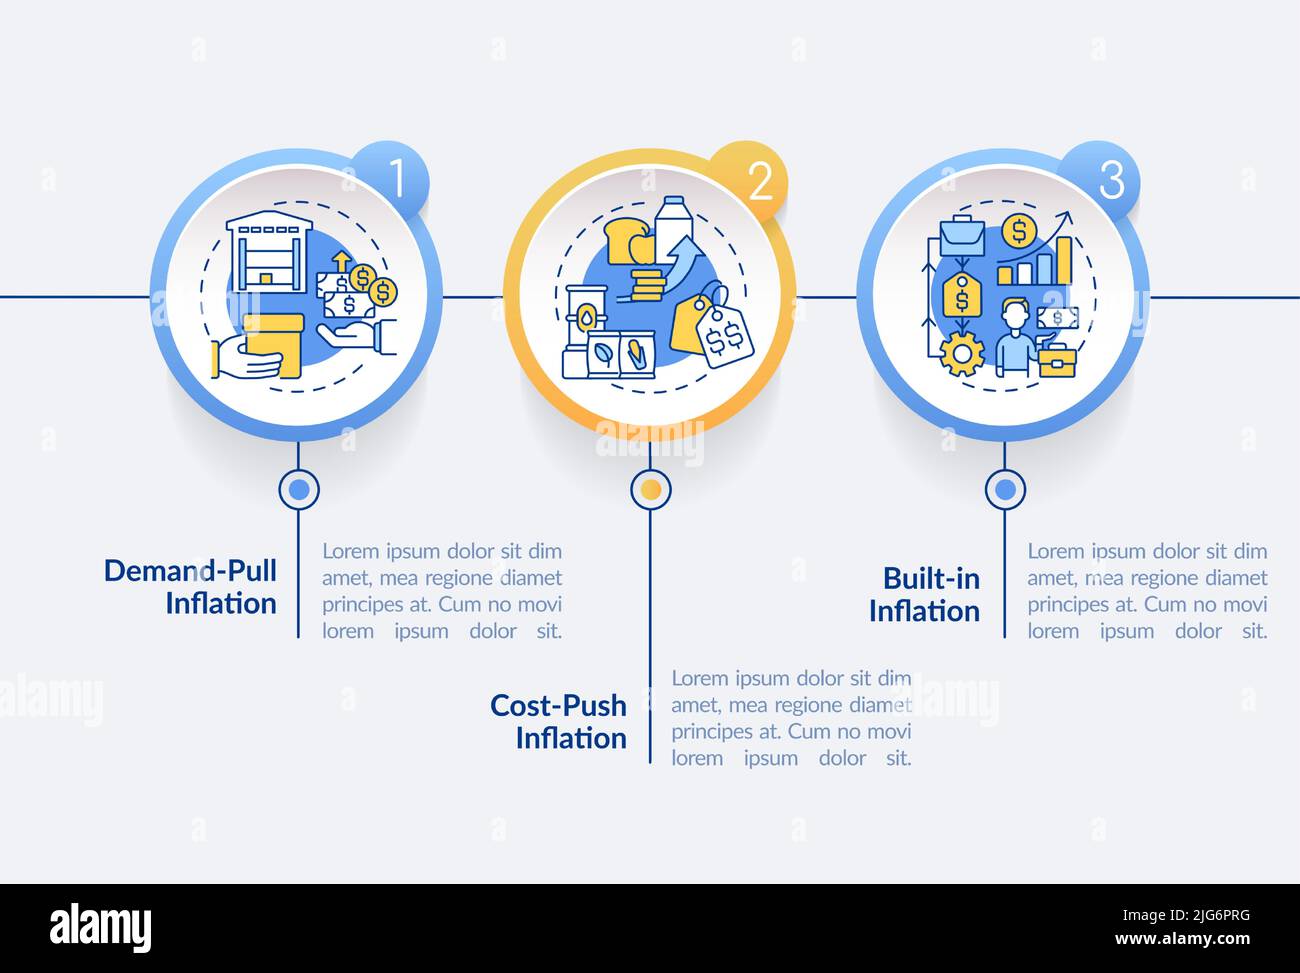 Inflation types circle infographic template Stock Vector